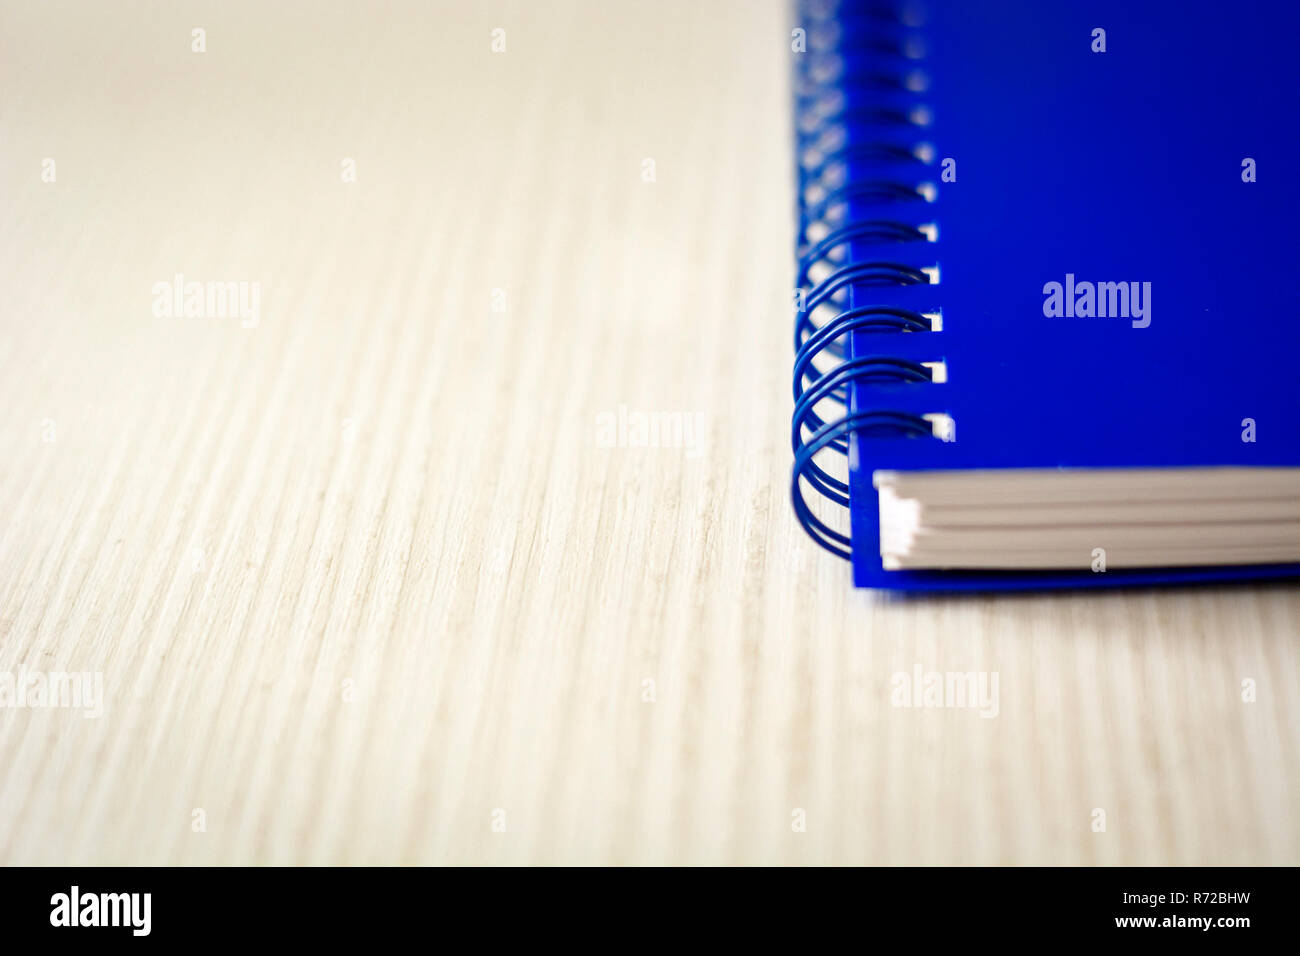 Spiral notebook isolated on a white table. Business and productivity concept. Spiral binding, stationery product Stock Photo